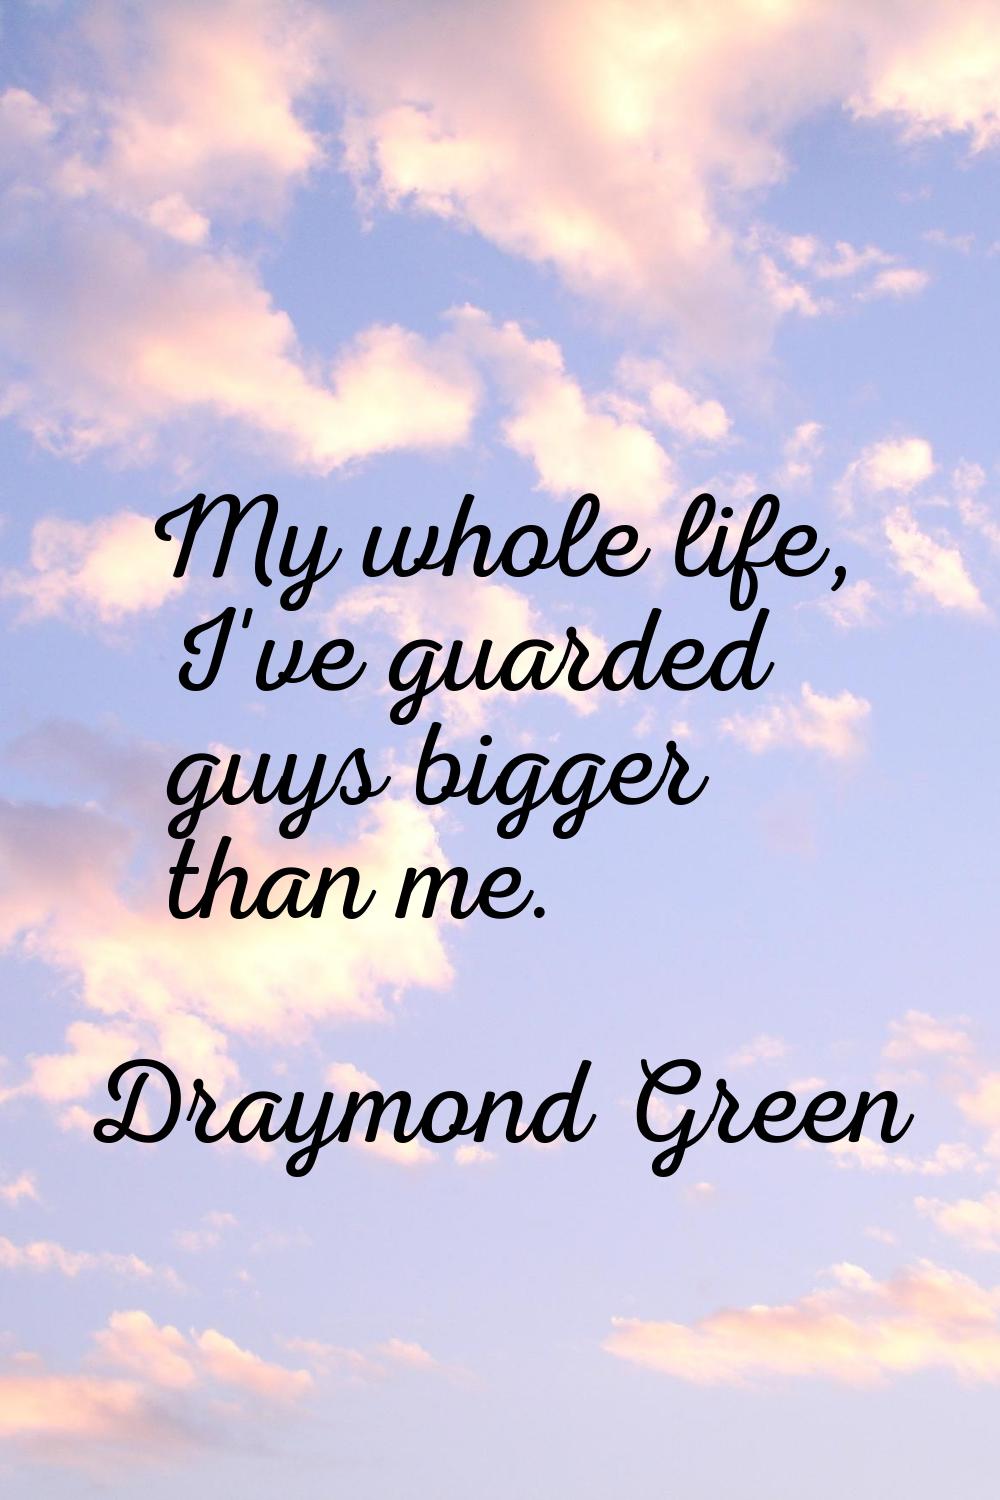 My whole life, I've guarded guys bigger than me.